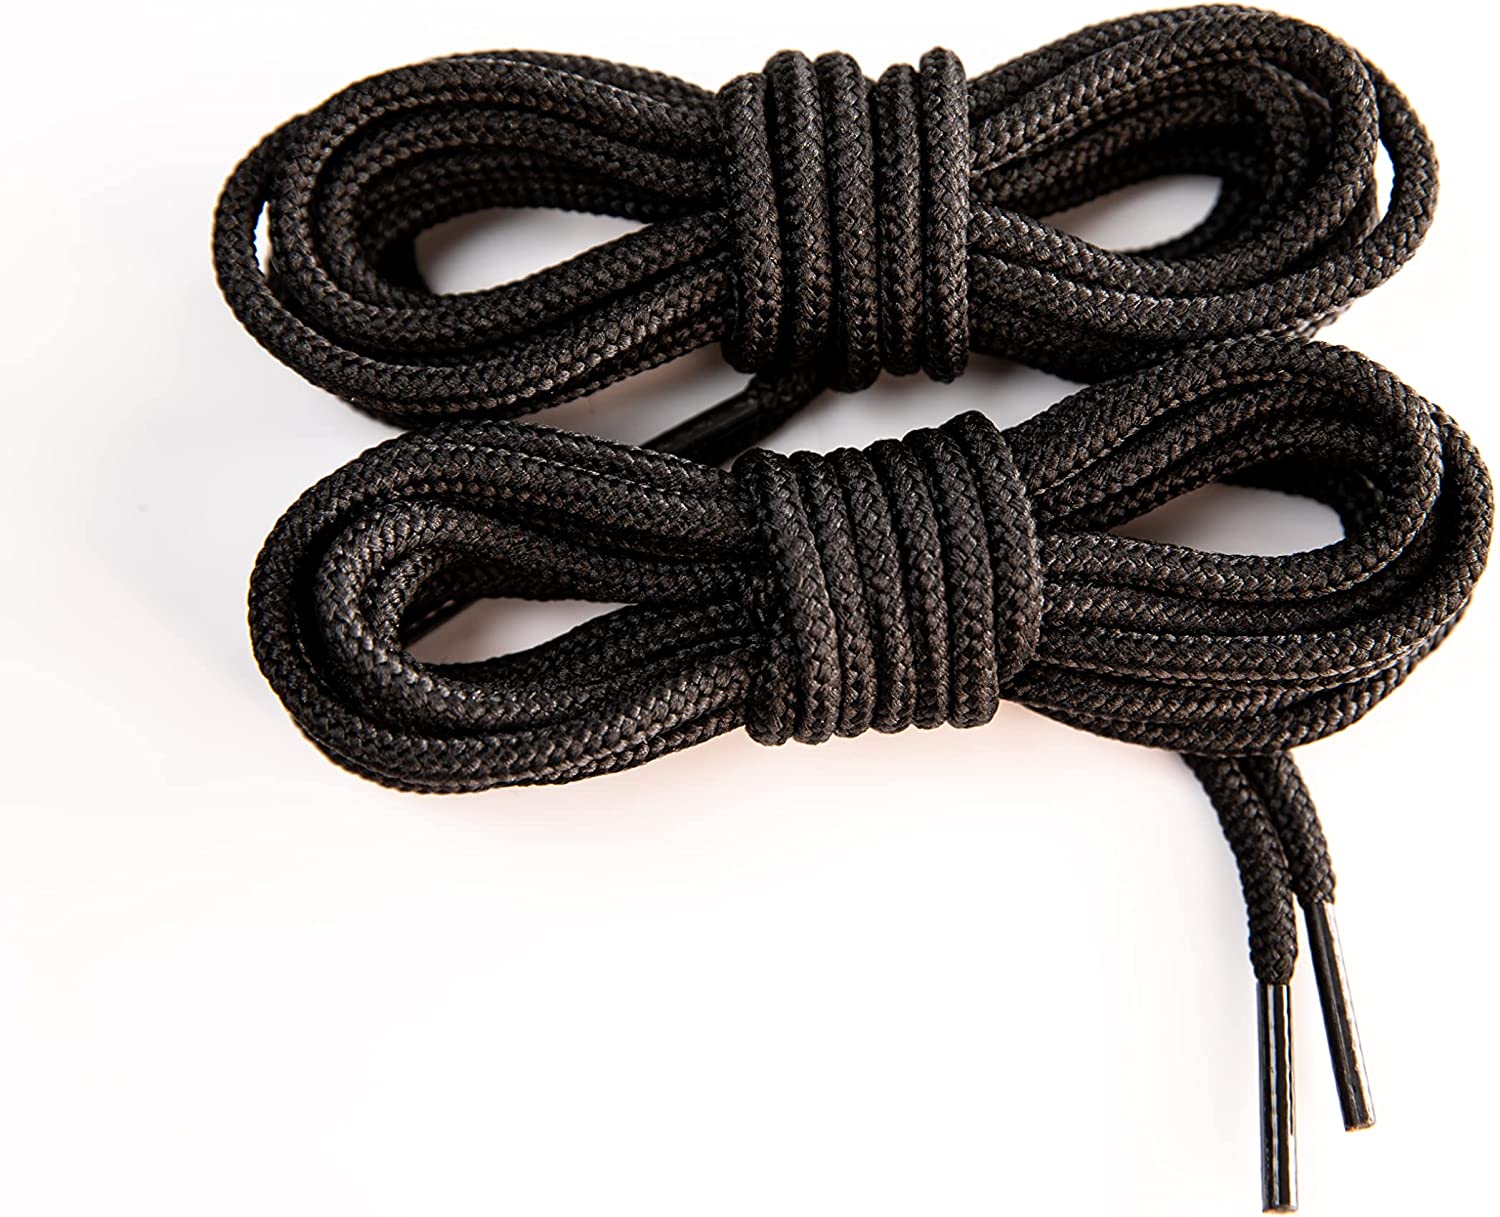 Obenauf's Industrial Strength Boot Laces 108